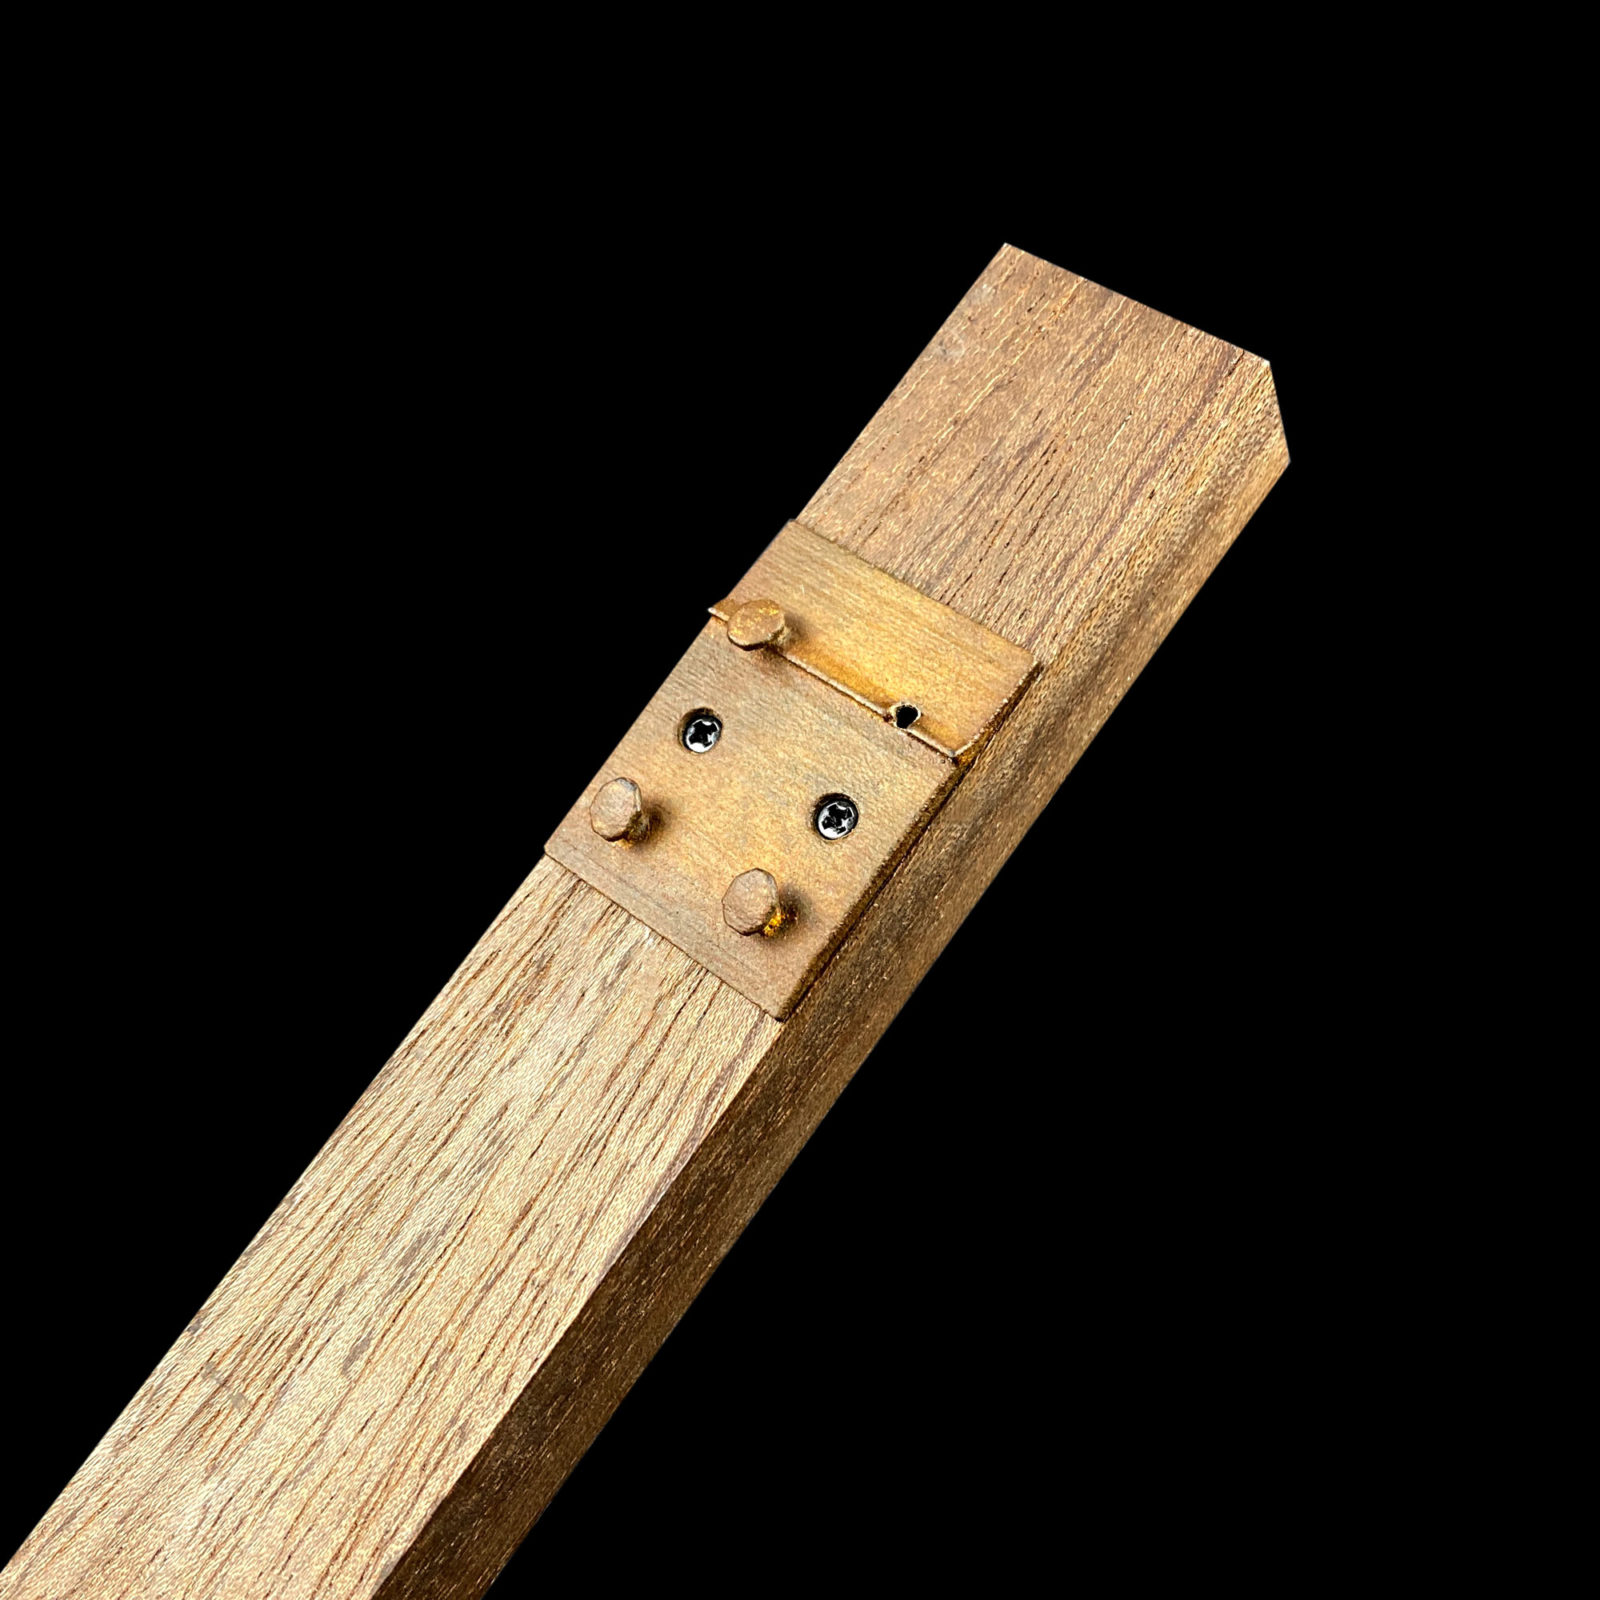 Tie plate on a wooden tie from Railroad mod